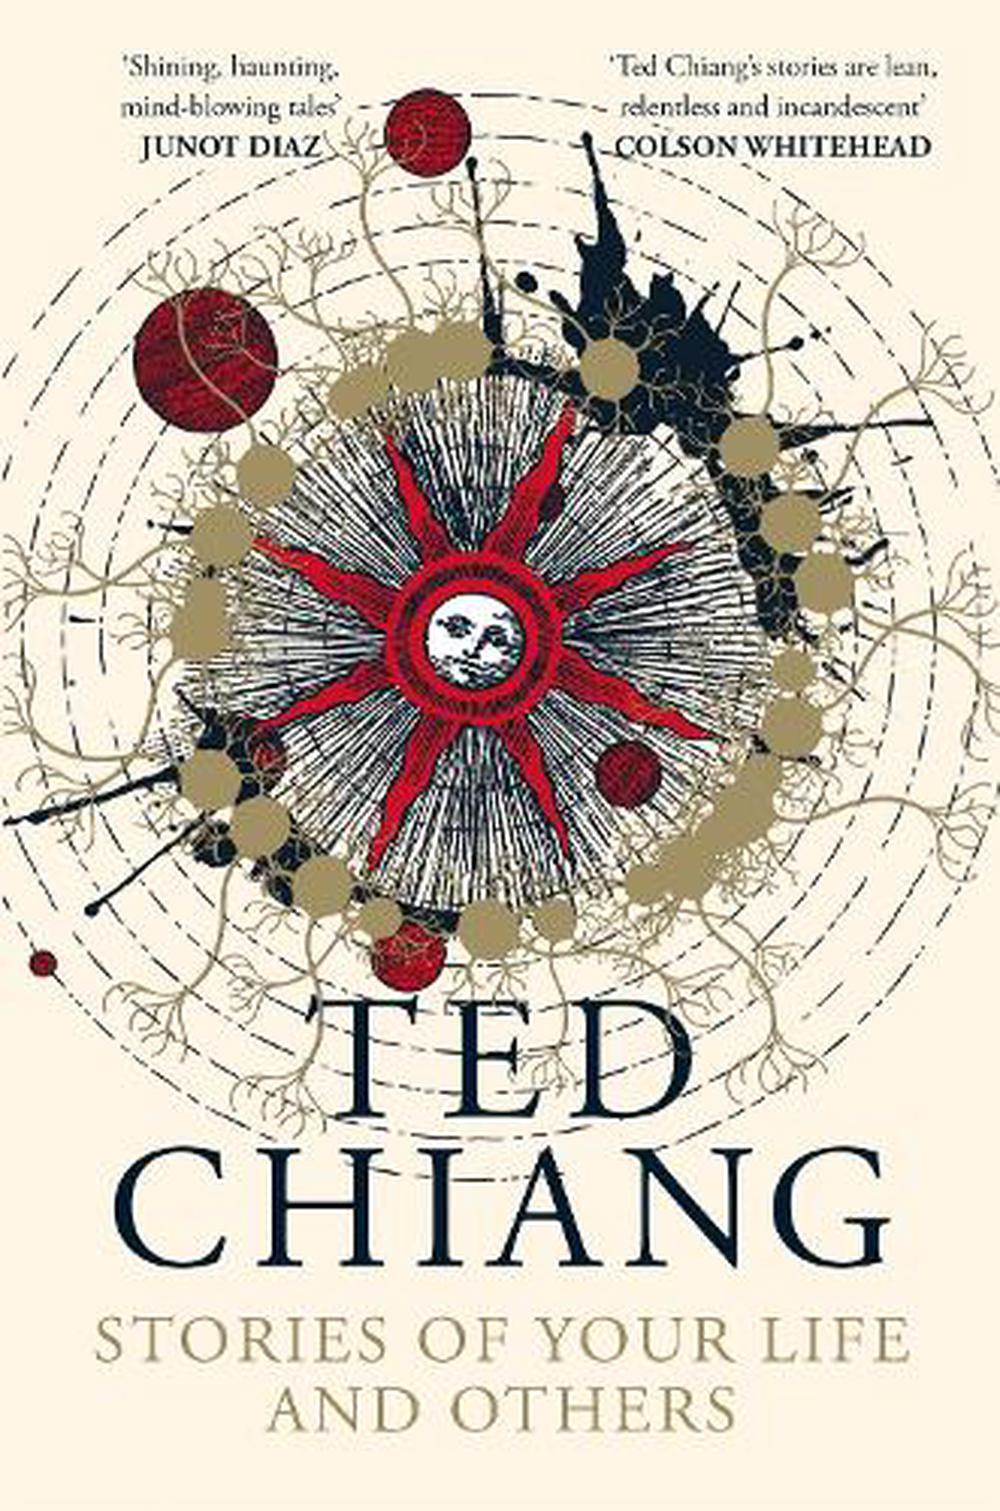 ted chiang stories